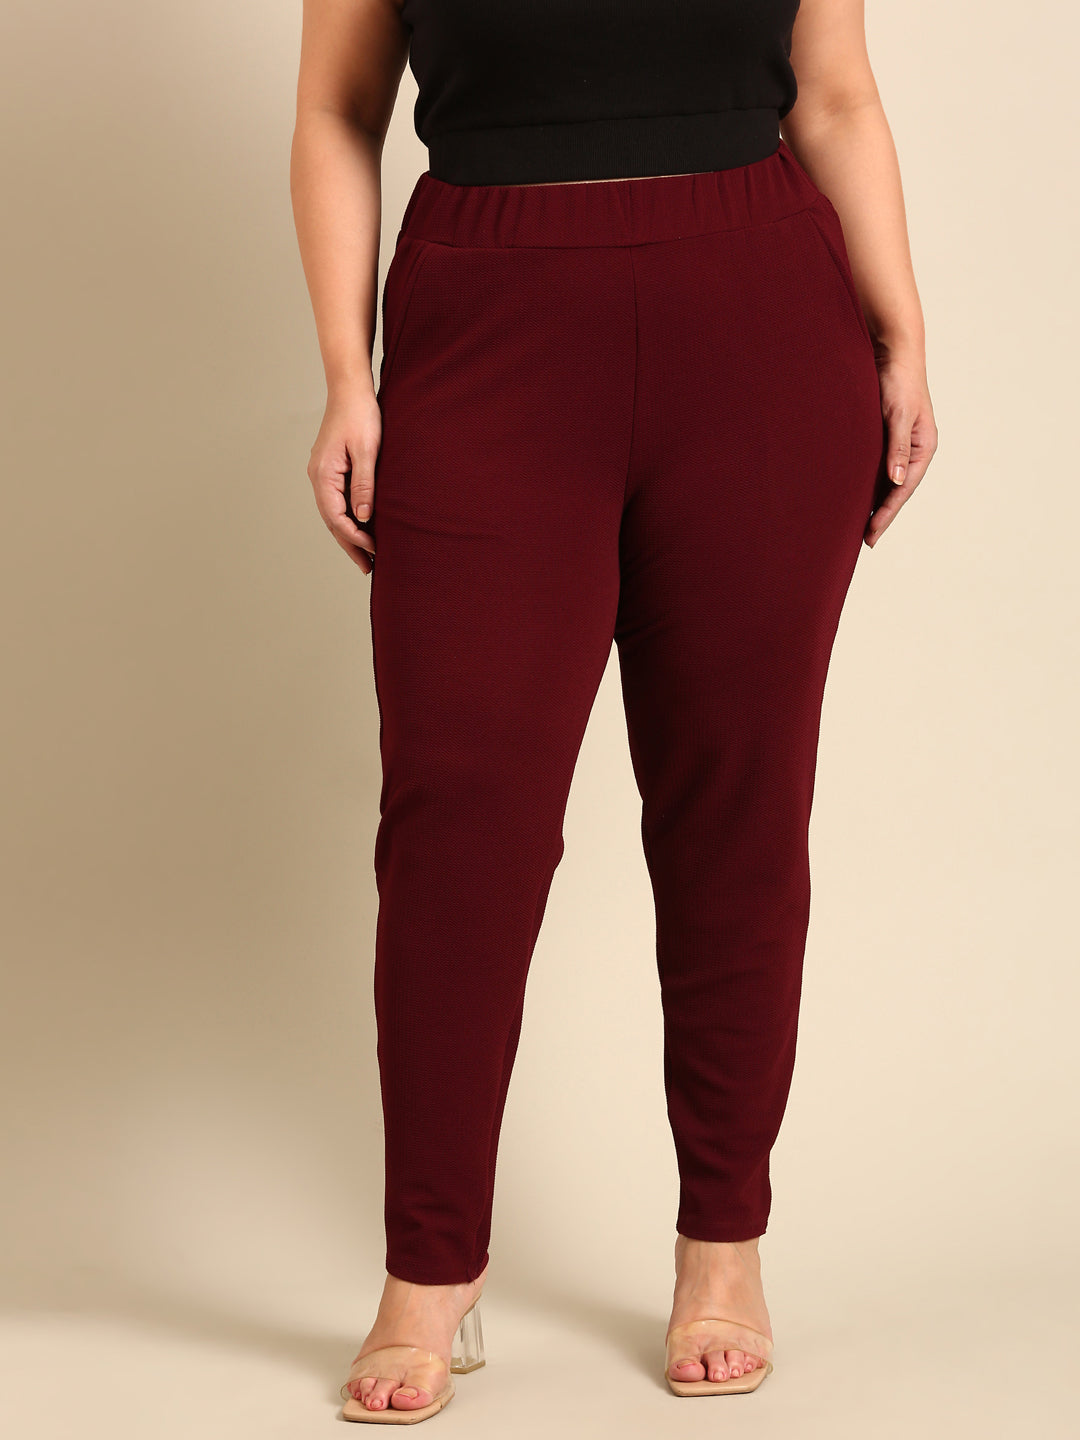 Buy STOP Grey Women's Slim Fit Solid Stretch Pants | Shoppers Stop